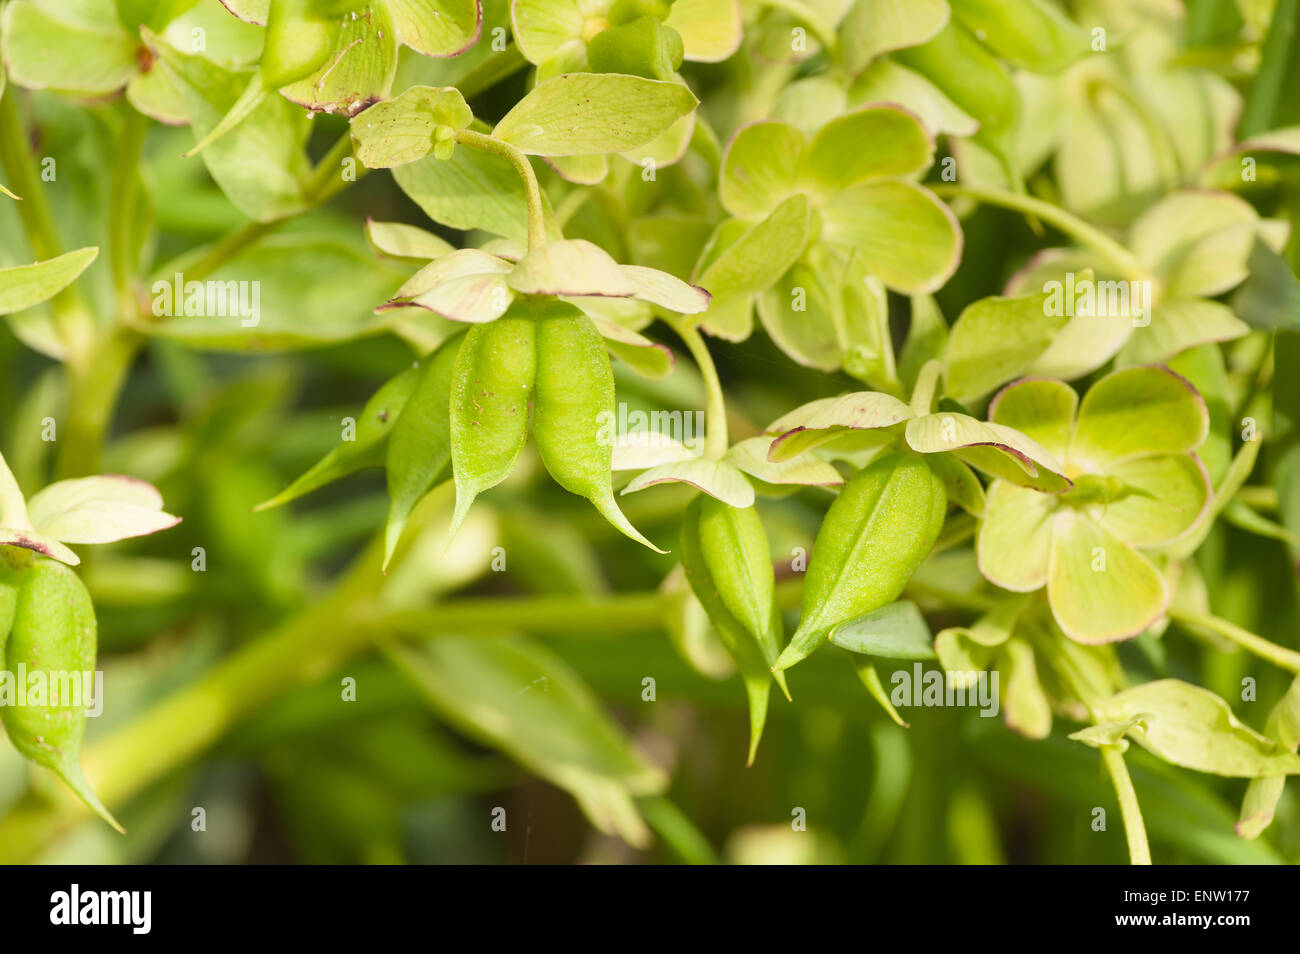 bright green seed cases of hellebore plant blend in with the green sepals from the flower whilst petals have been shed Stock Photo